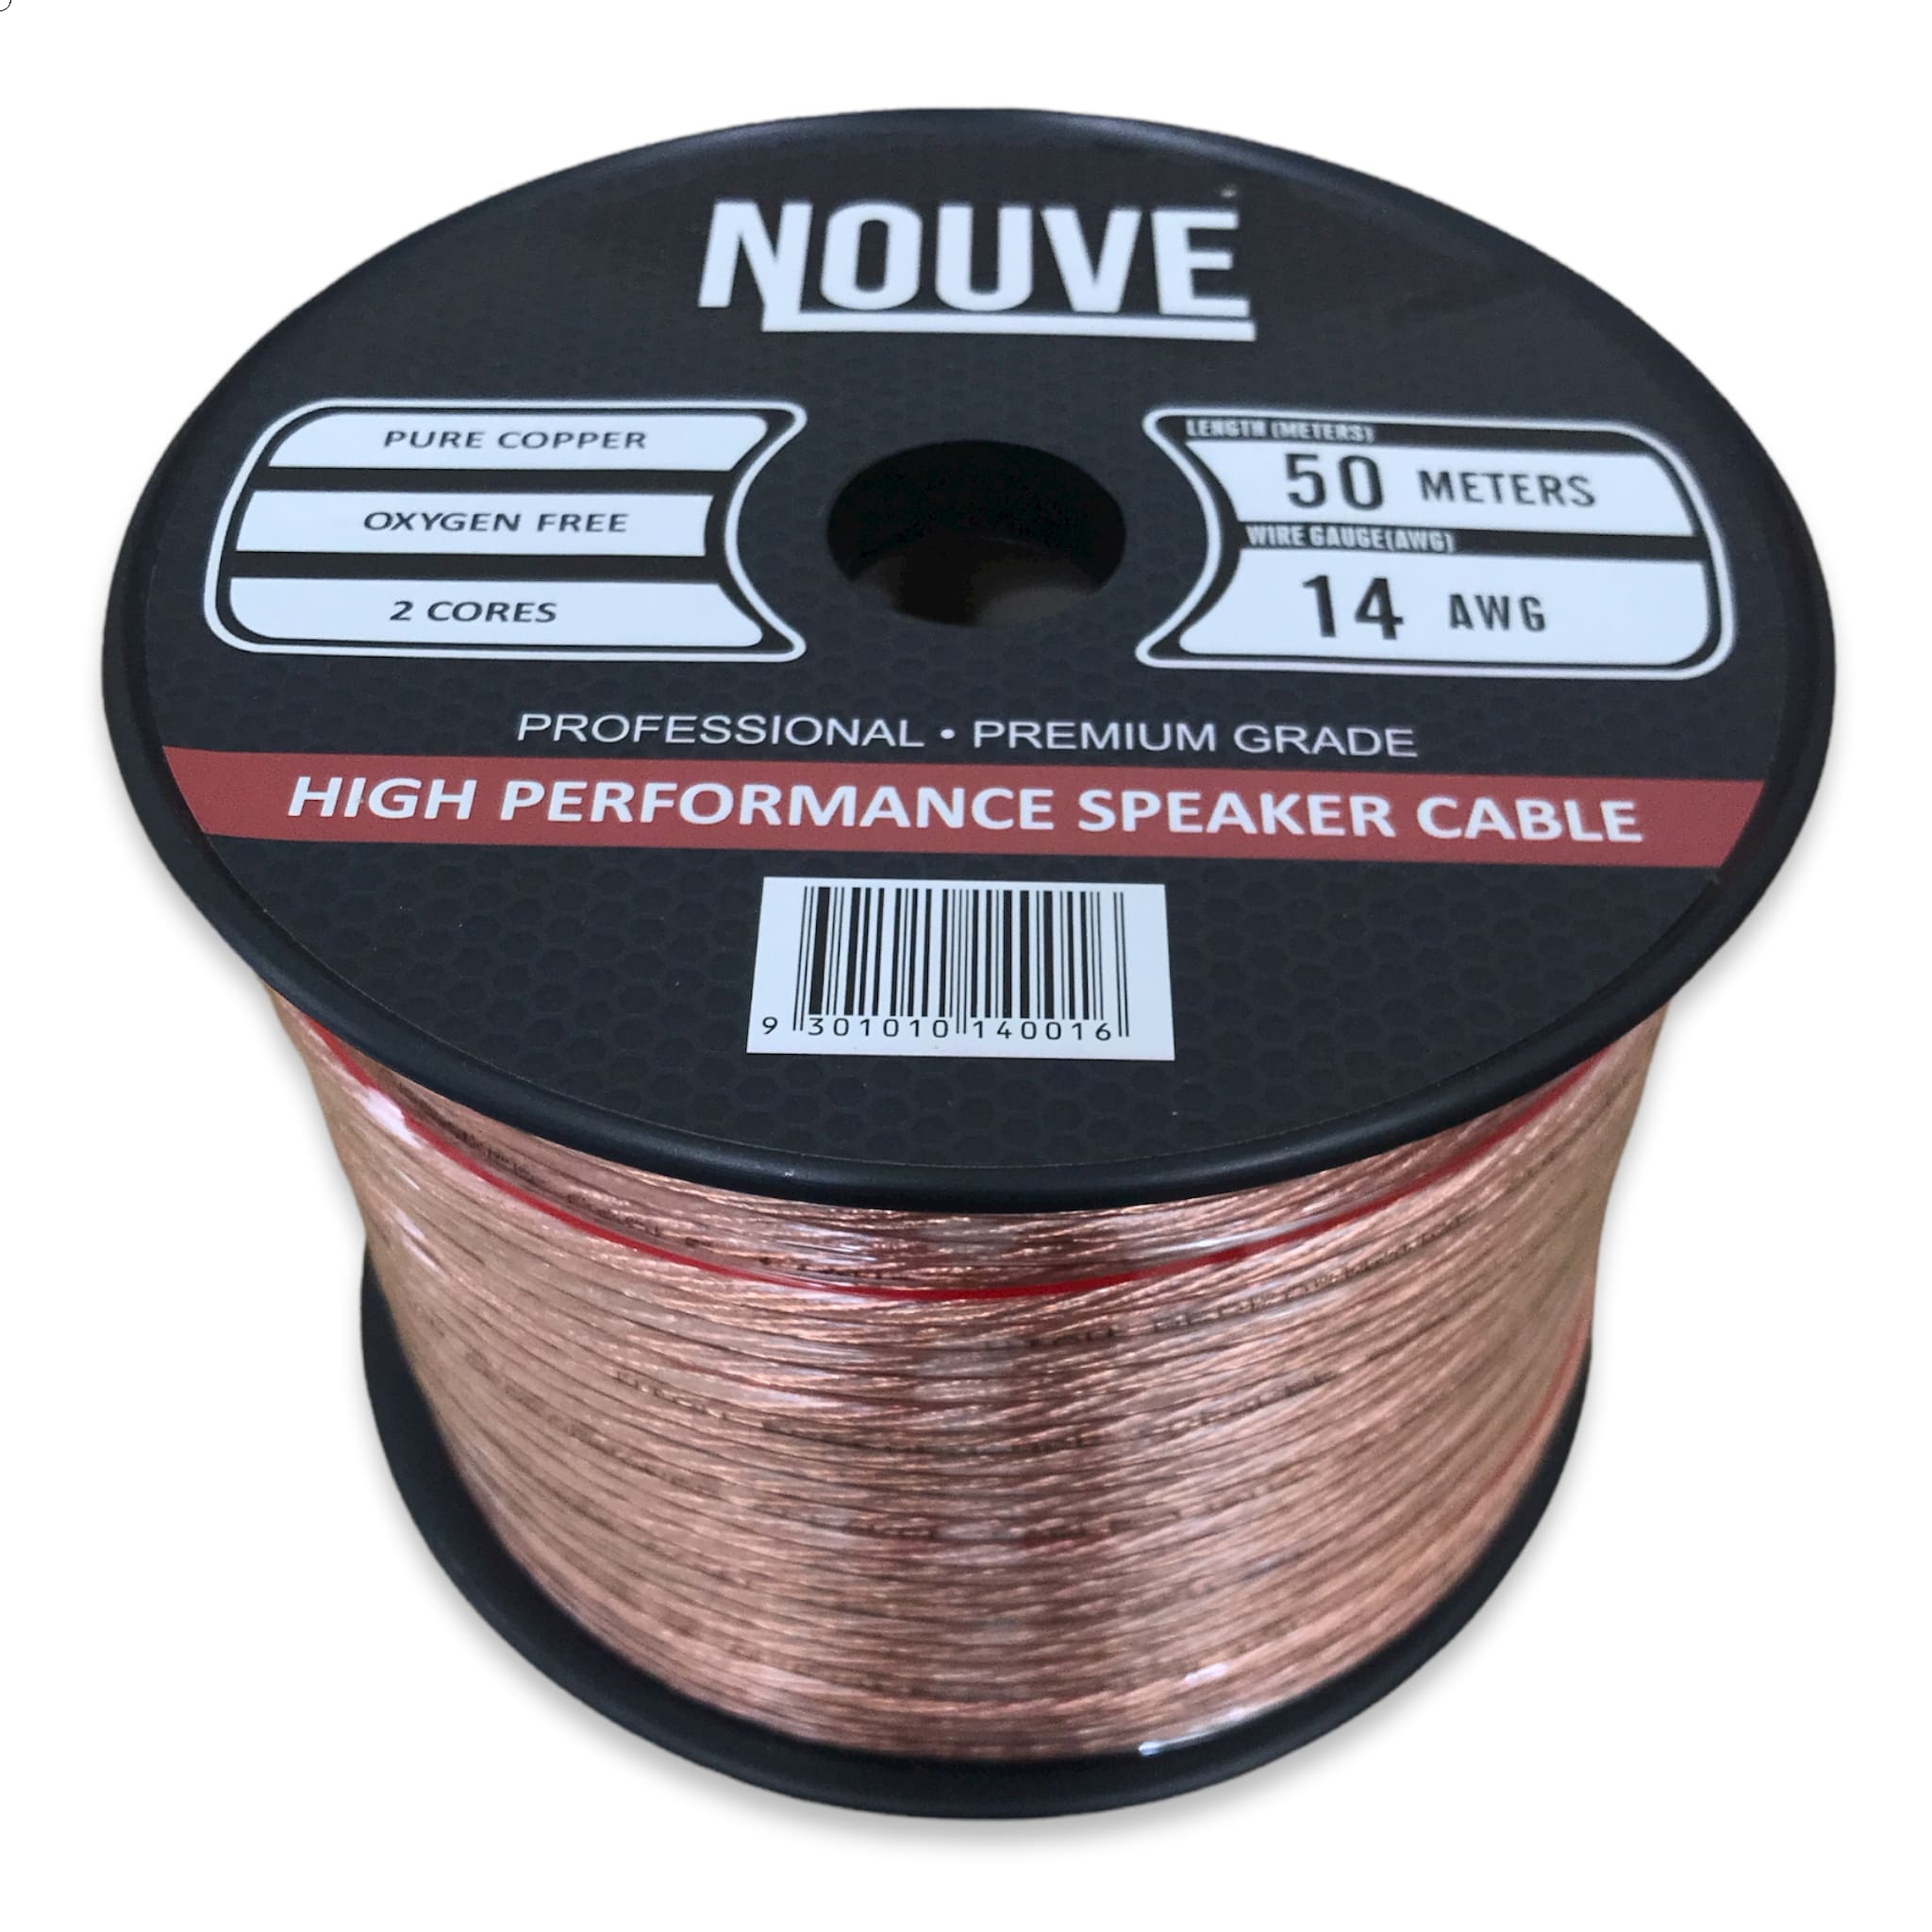 14 awg speaker cable pure copper